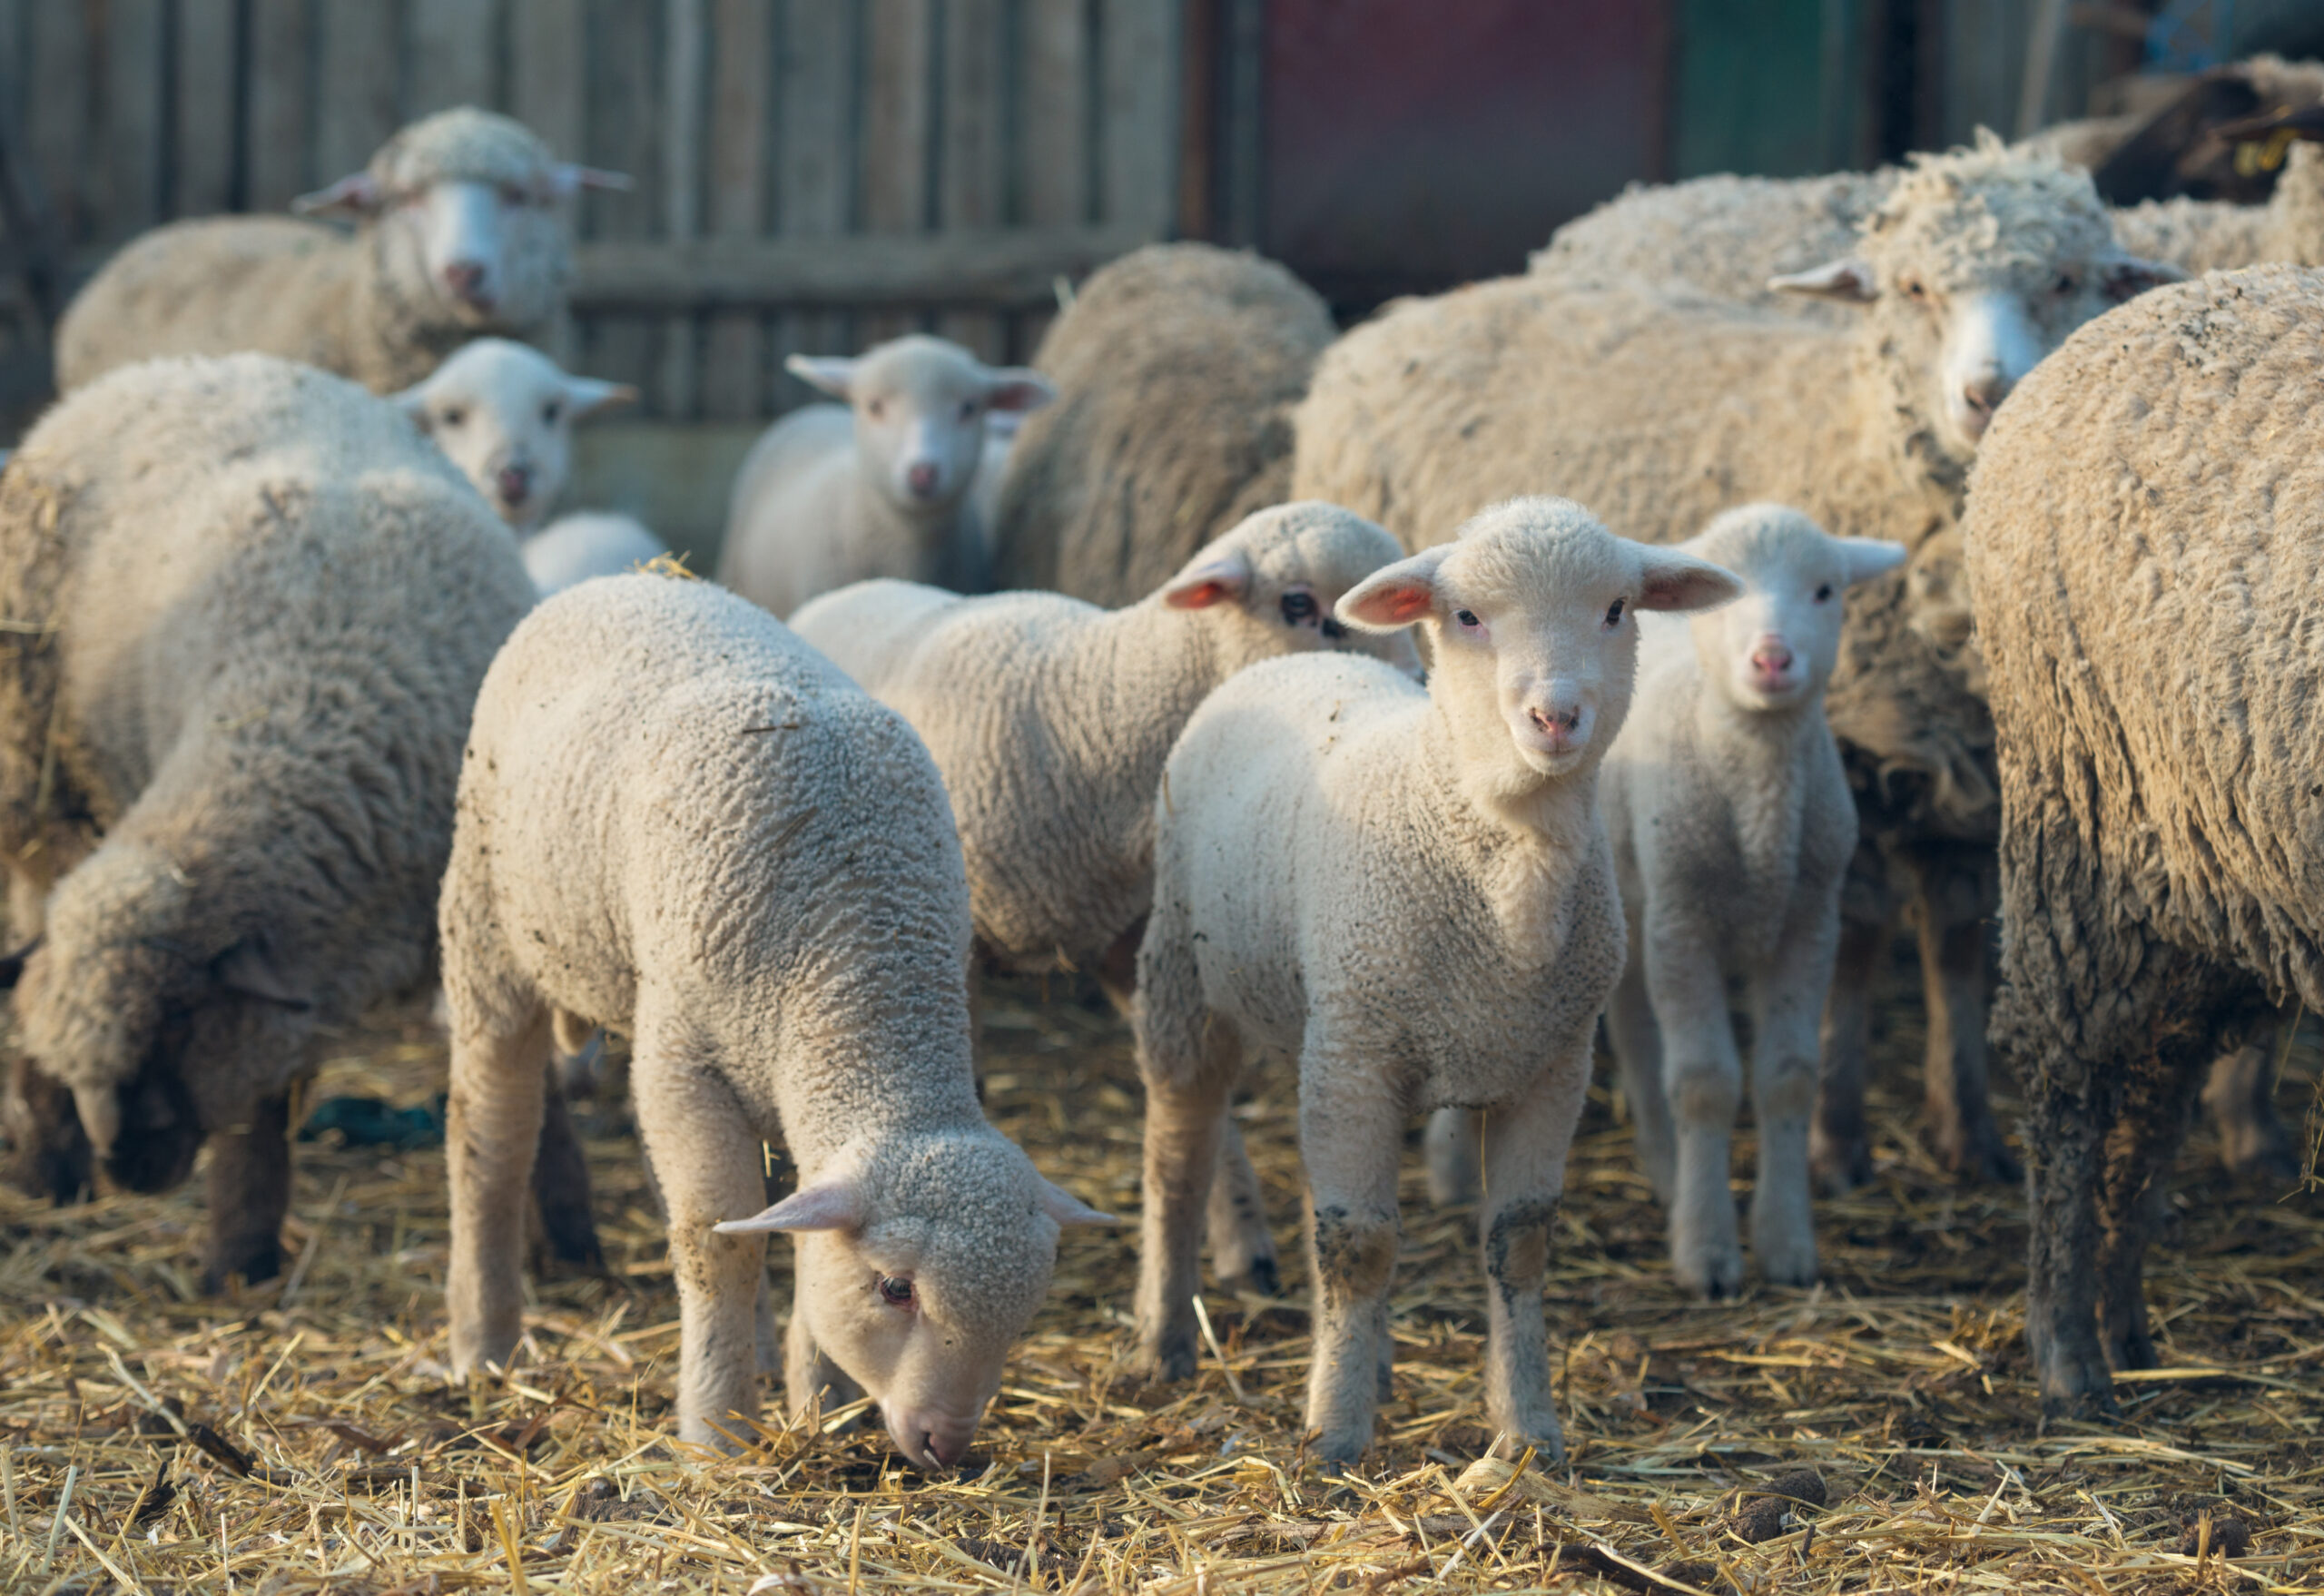 Supply and price edging lower for lambs